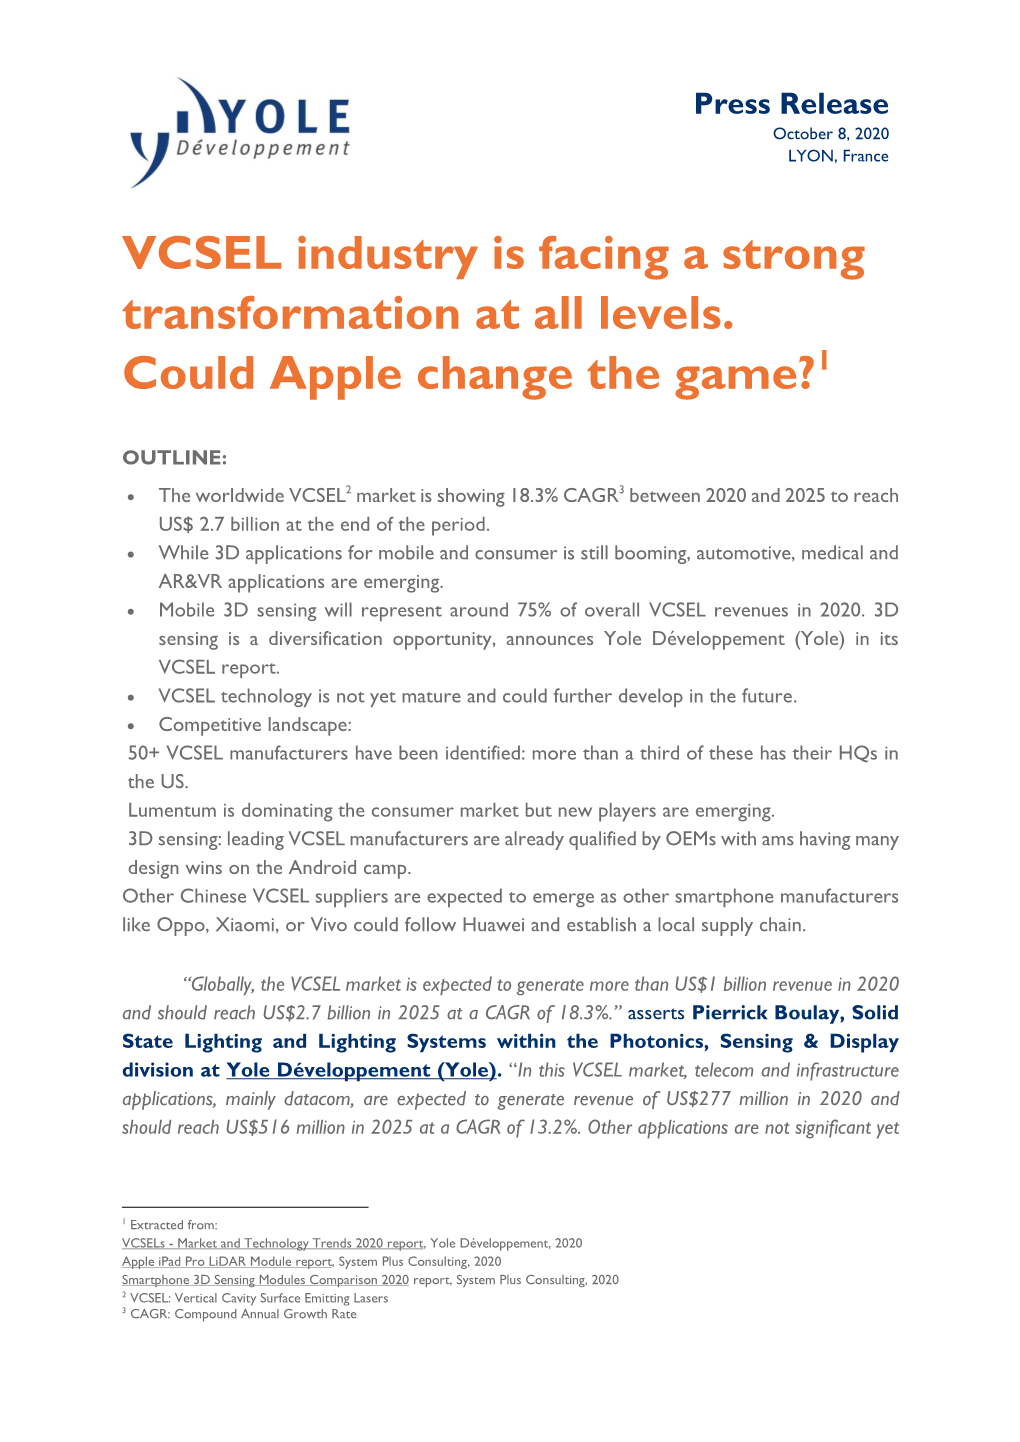 VCSEL Industry Is Facing a Strong Transformation at All Levels. Could Apple Change the Game?1